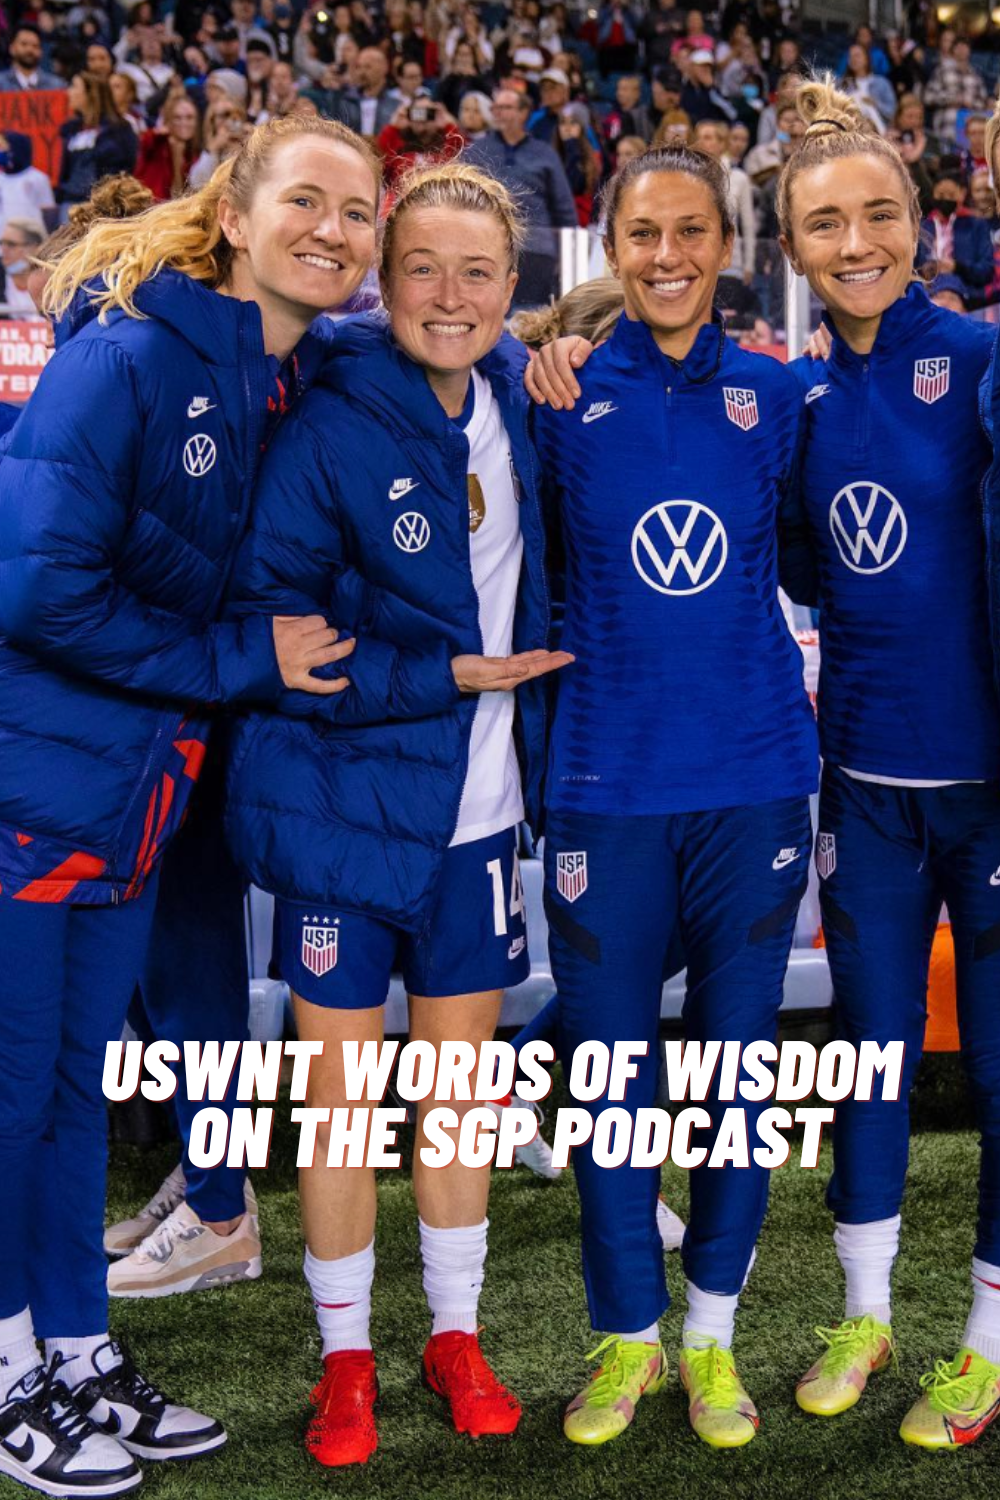 USWNT Players' Advice (from the SoccerGrlProbs Podcast)